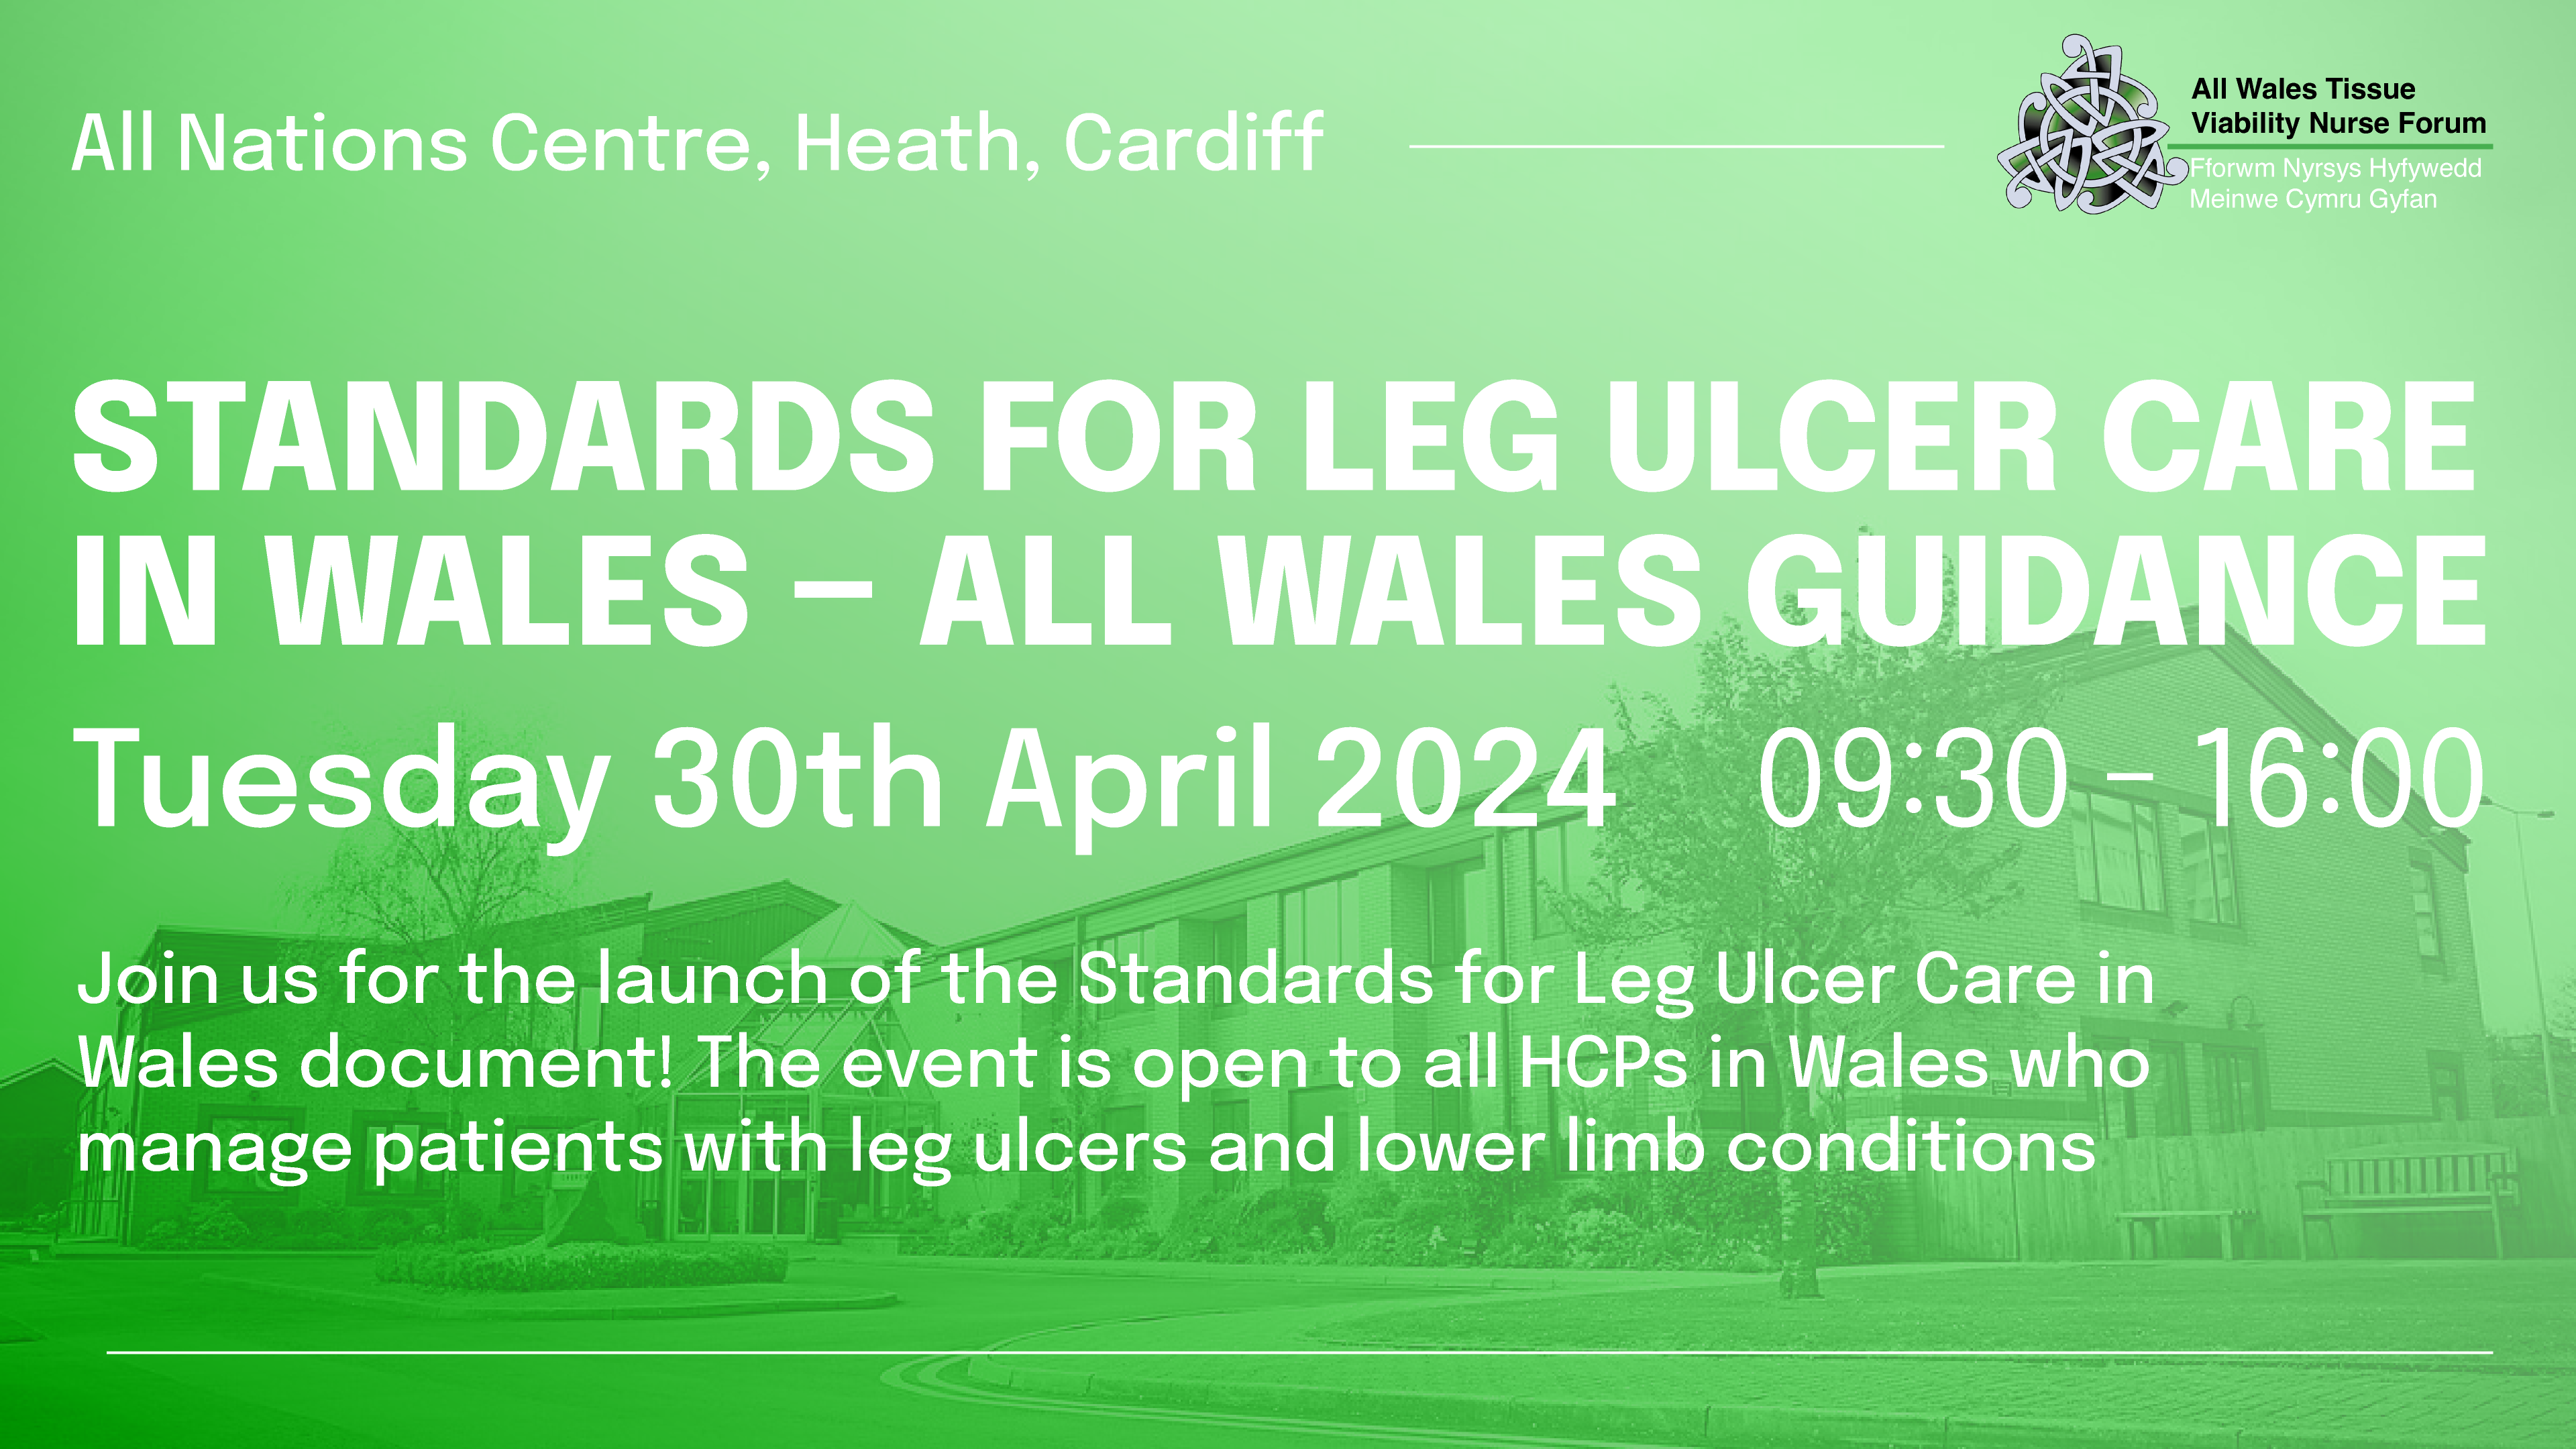 Standards for Leg Ulcer Care in Wales – All Wales Guidance